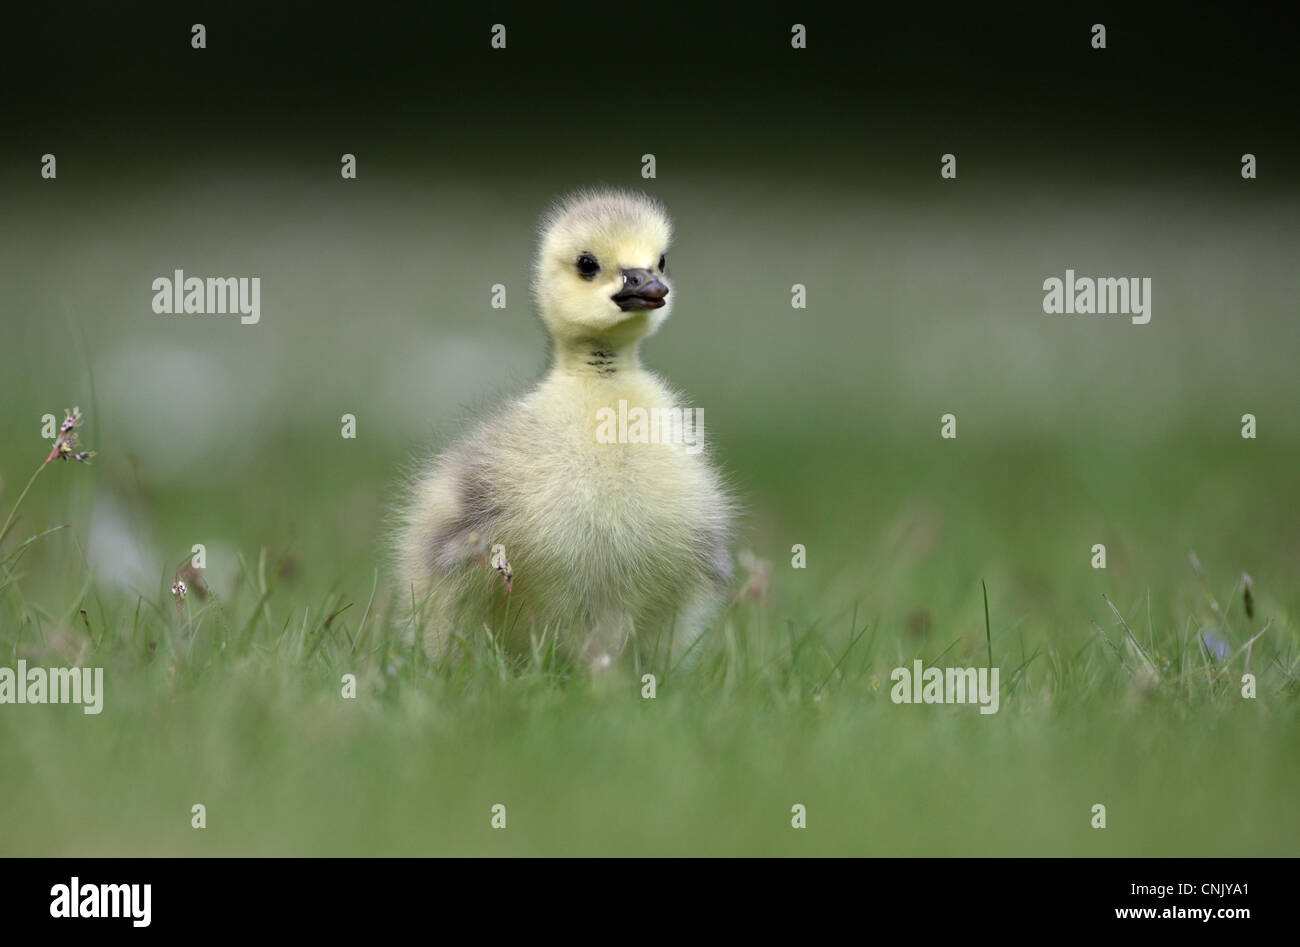 Canada Goose (Branta canadensis) introduced species, gosling, standing on grass, London, England, may Stock Photo